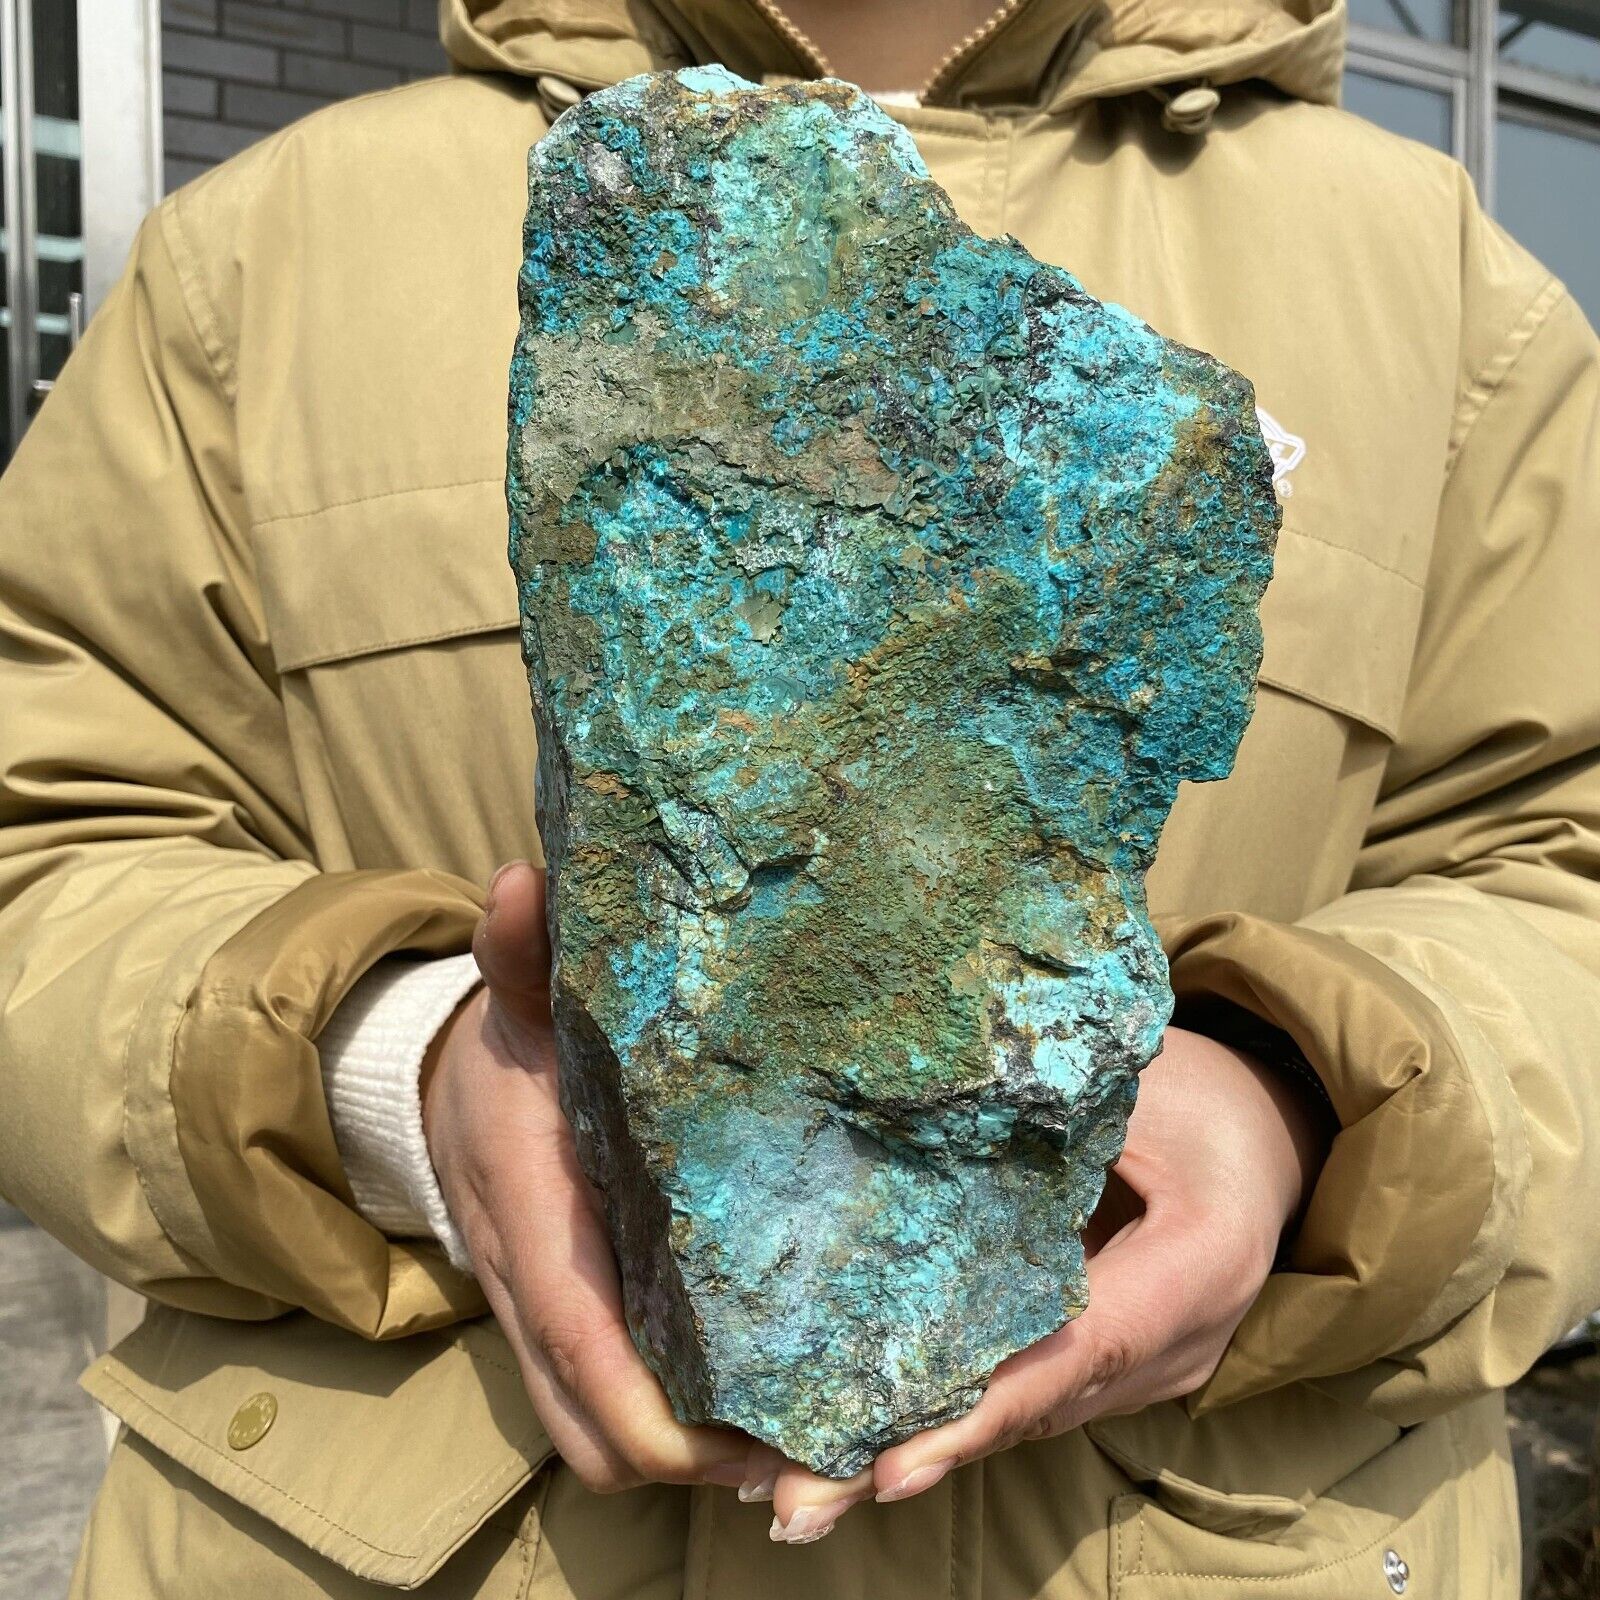 9.8lb Large Rare Natural African Turquoise Rough Stone Specimen Crystal Healing